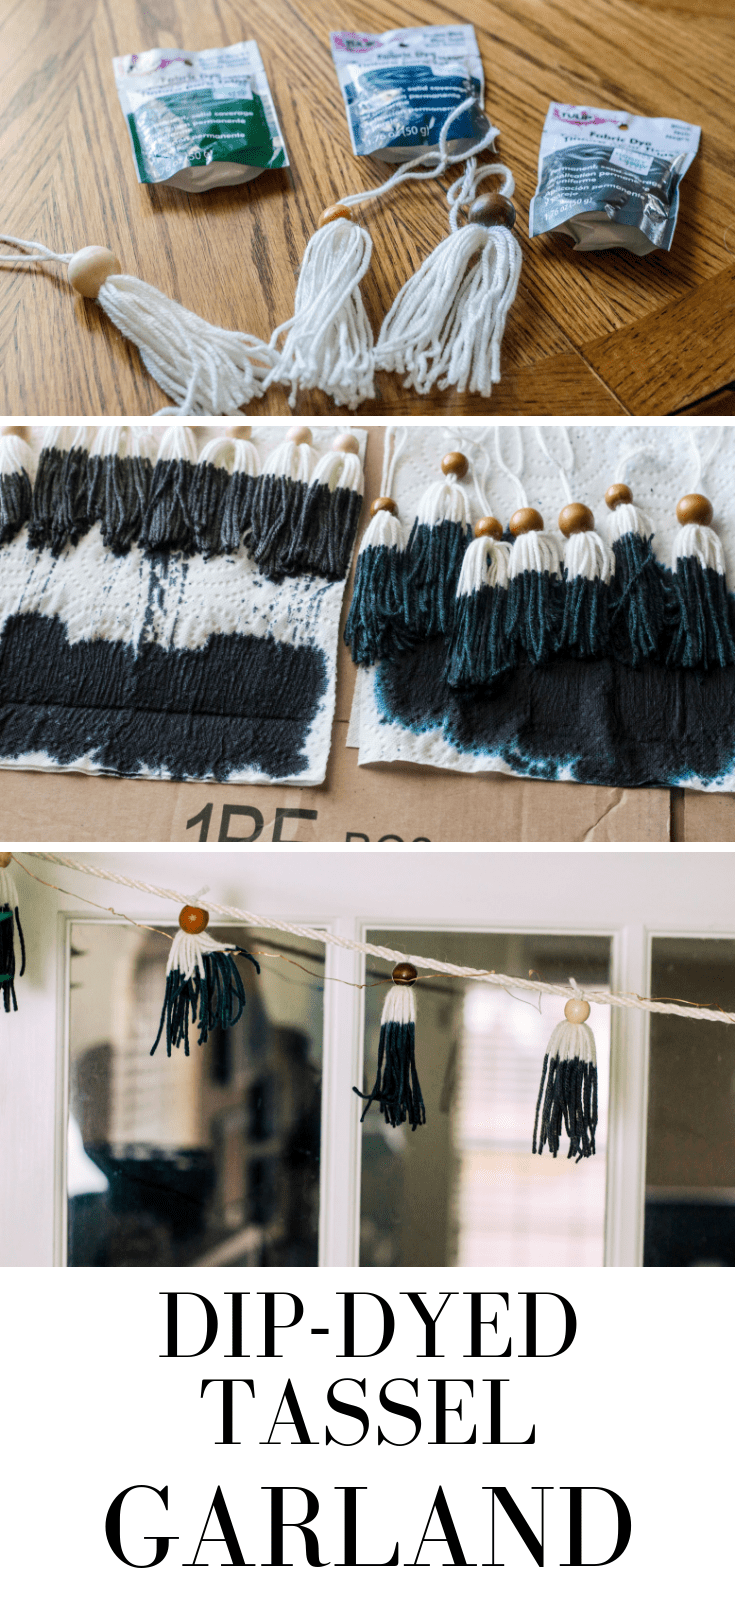 How to make your own dip-dye tassel garland